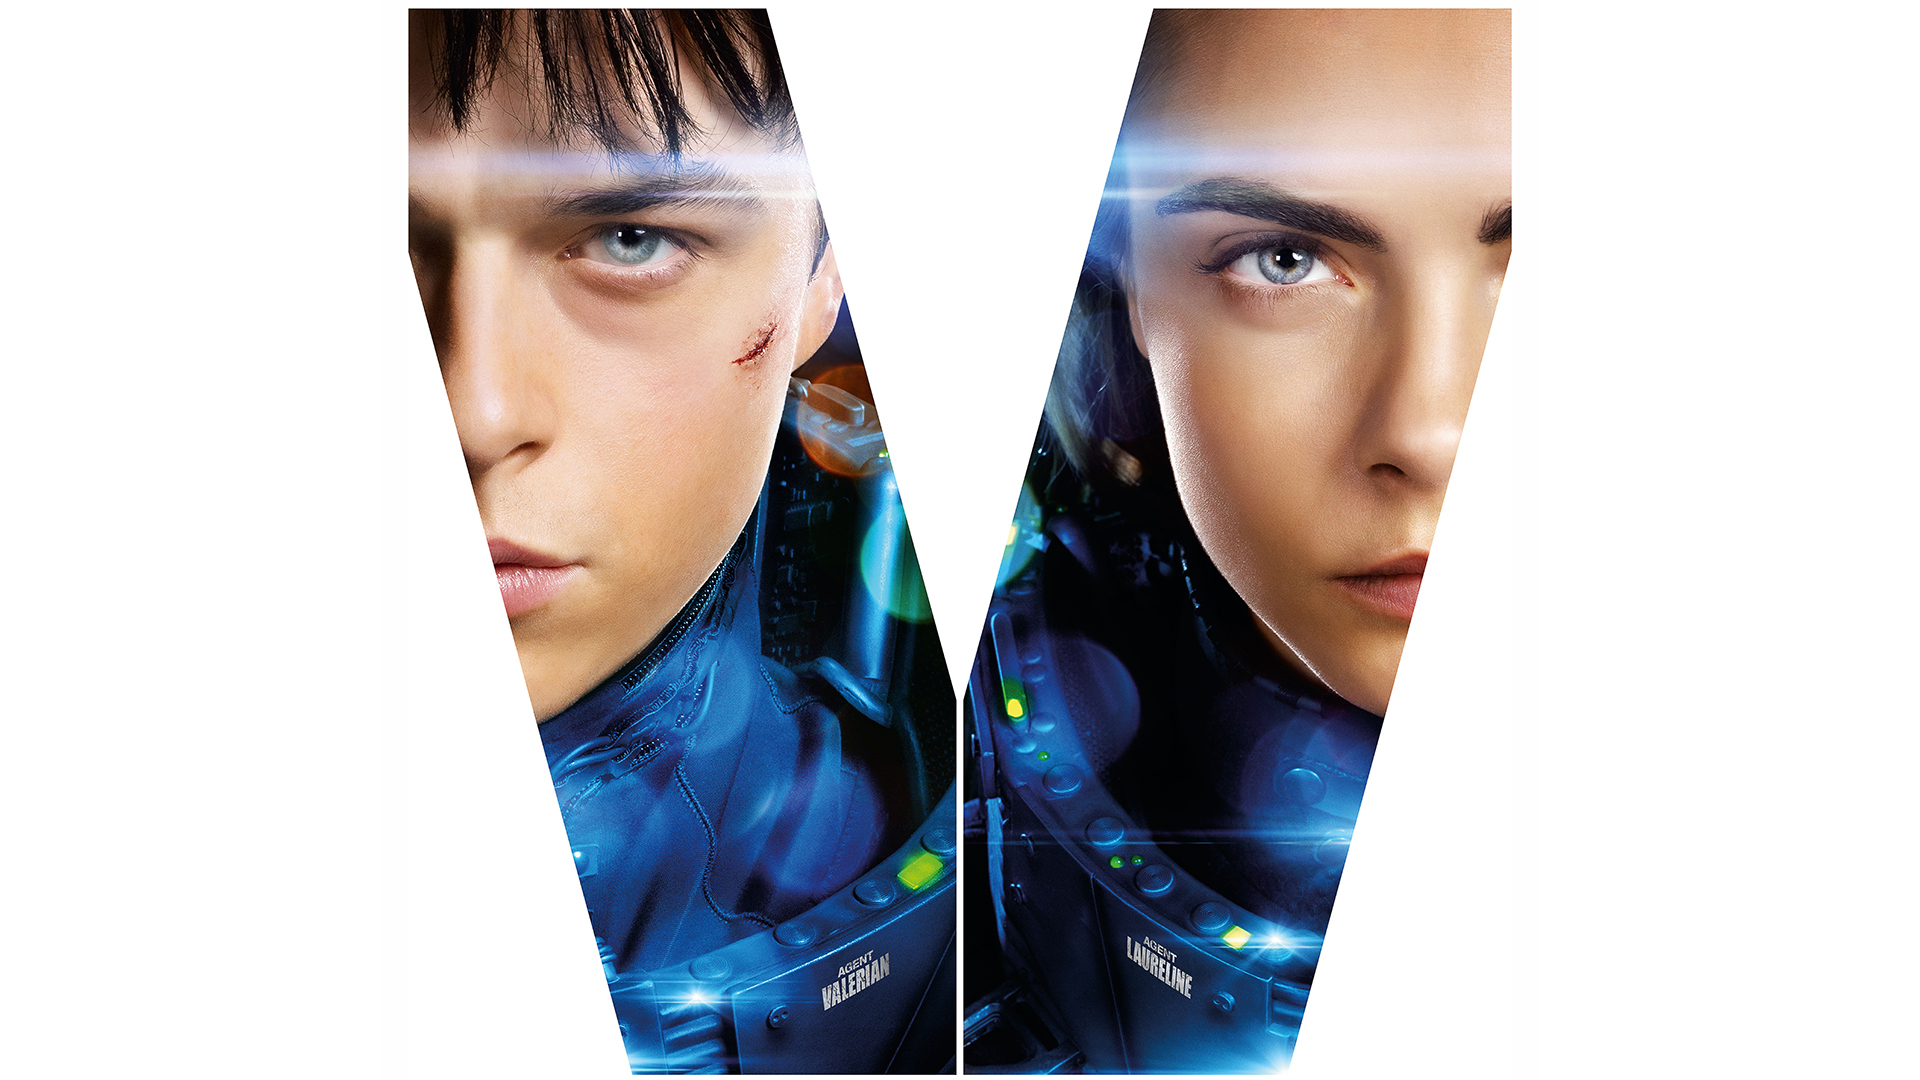 Movie Valerian and the City of a Thousand Planets HD Wallpaper | Background Image